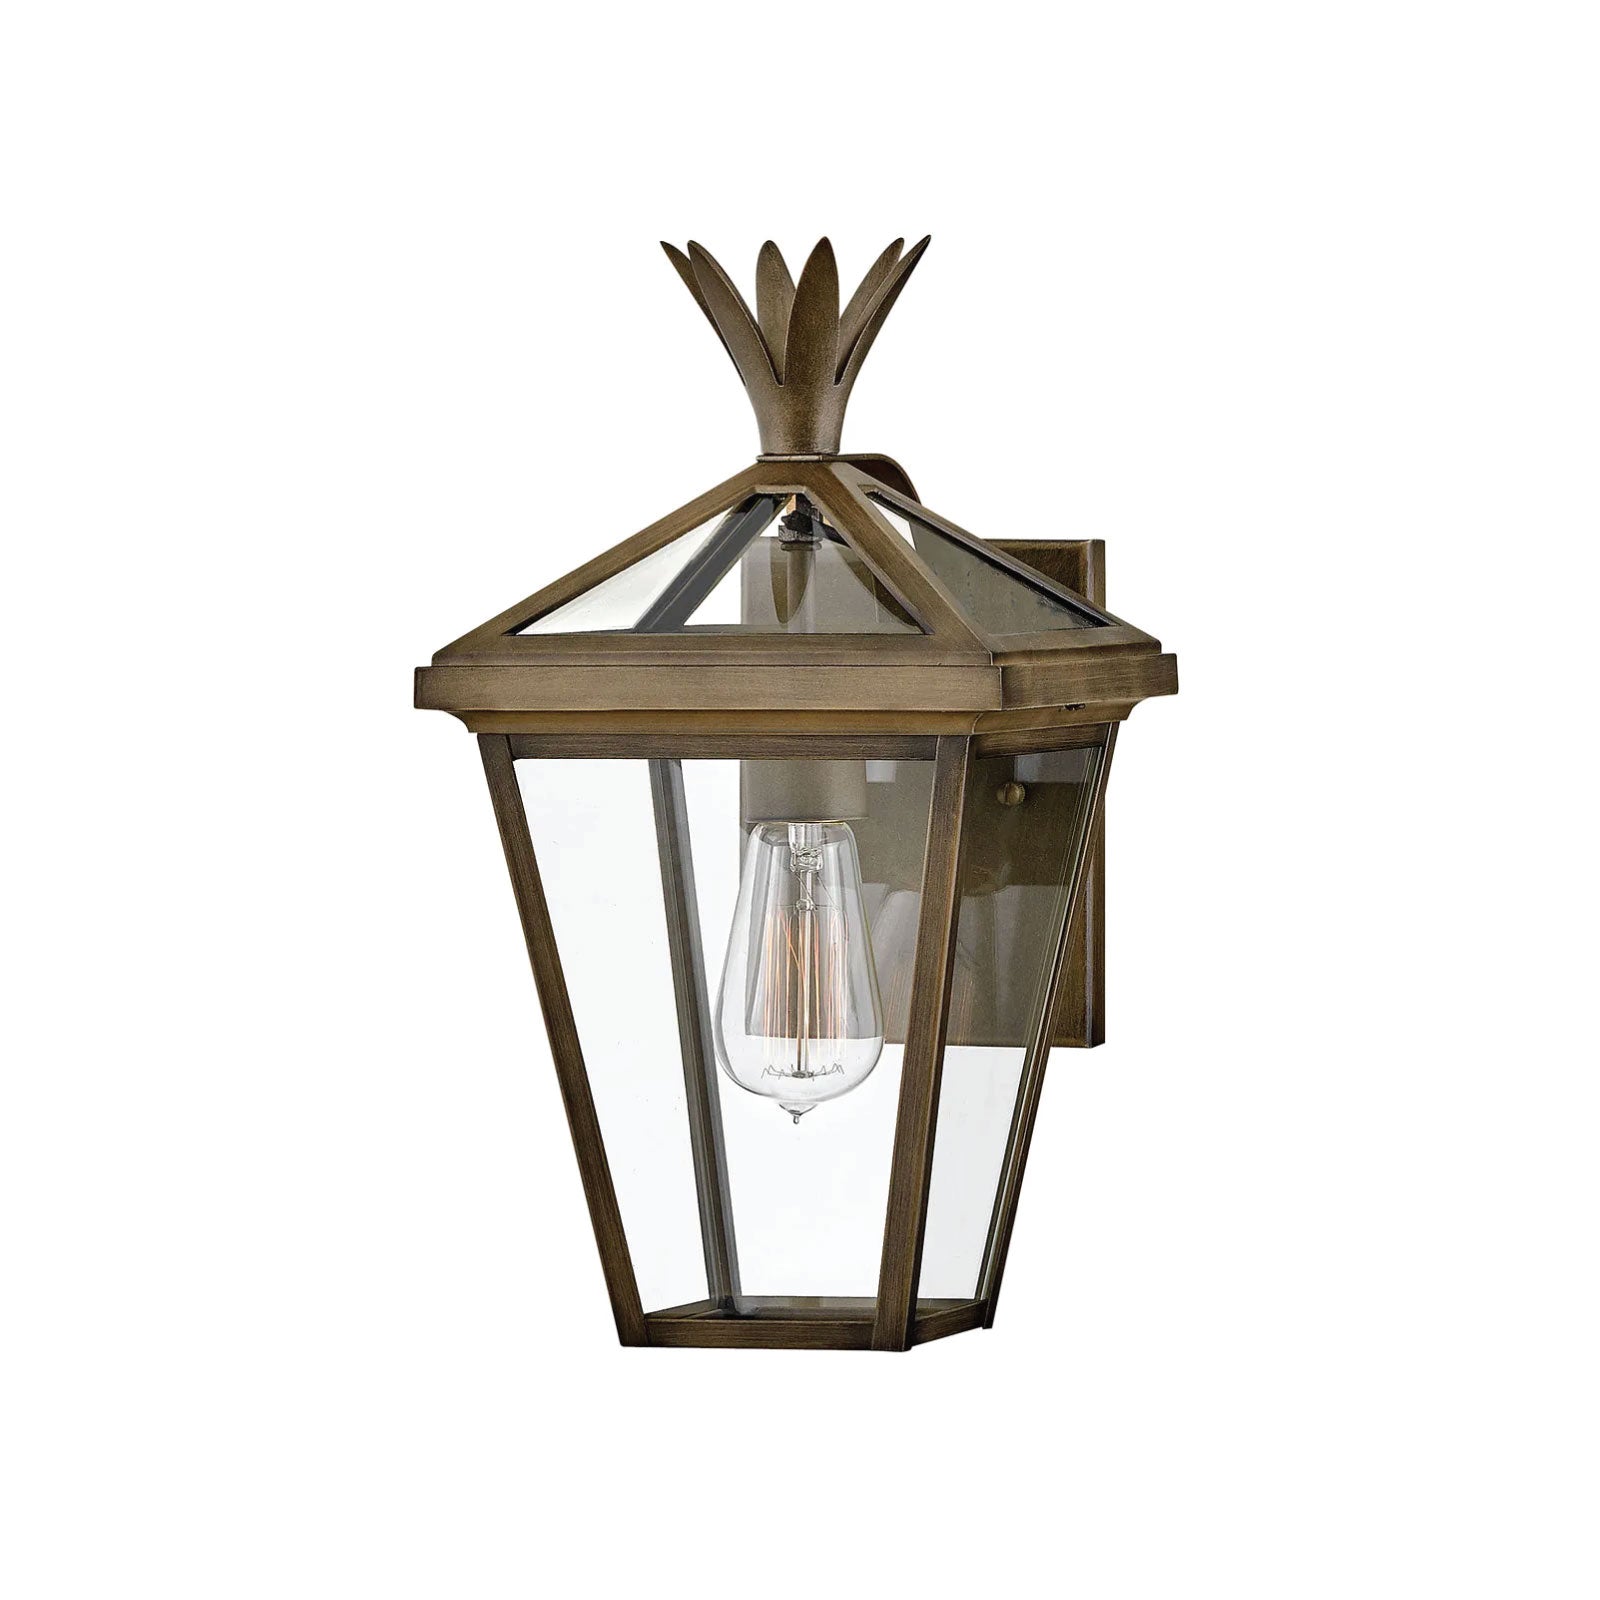 Hartford Small Wall Mount Lantern in Burnished Bronze